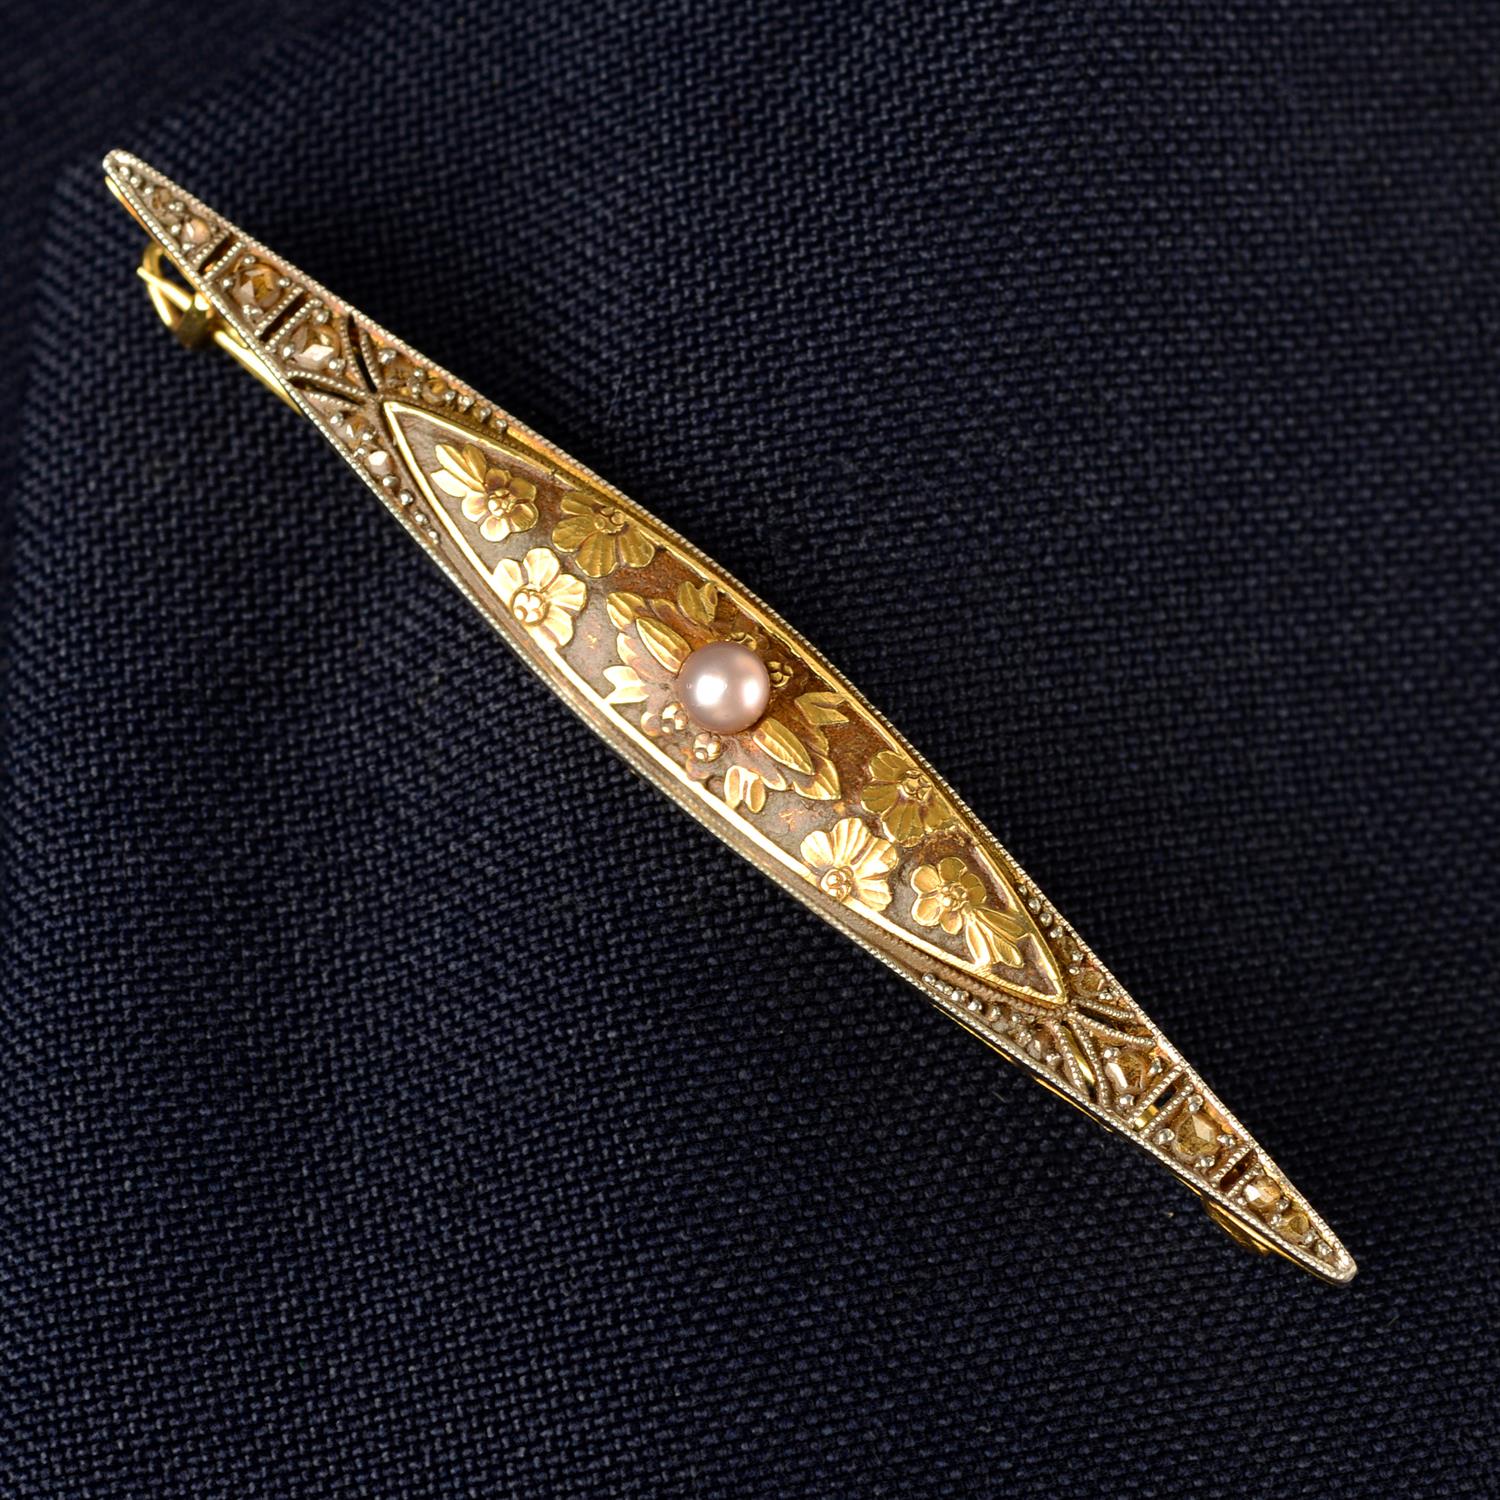 An early 20th century gold and platinum rose-cut diamond and seed pearl floral bar brooch.